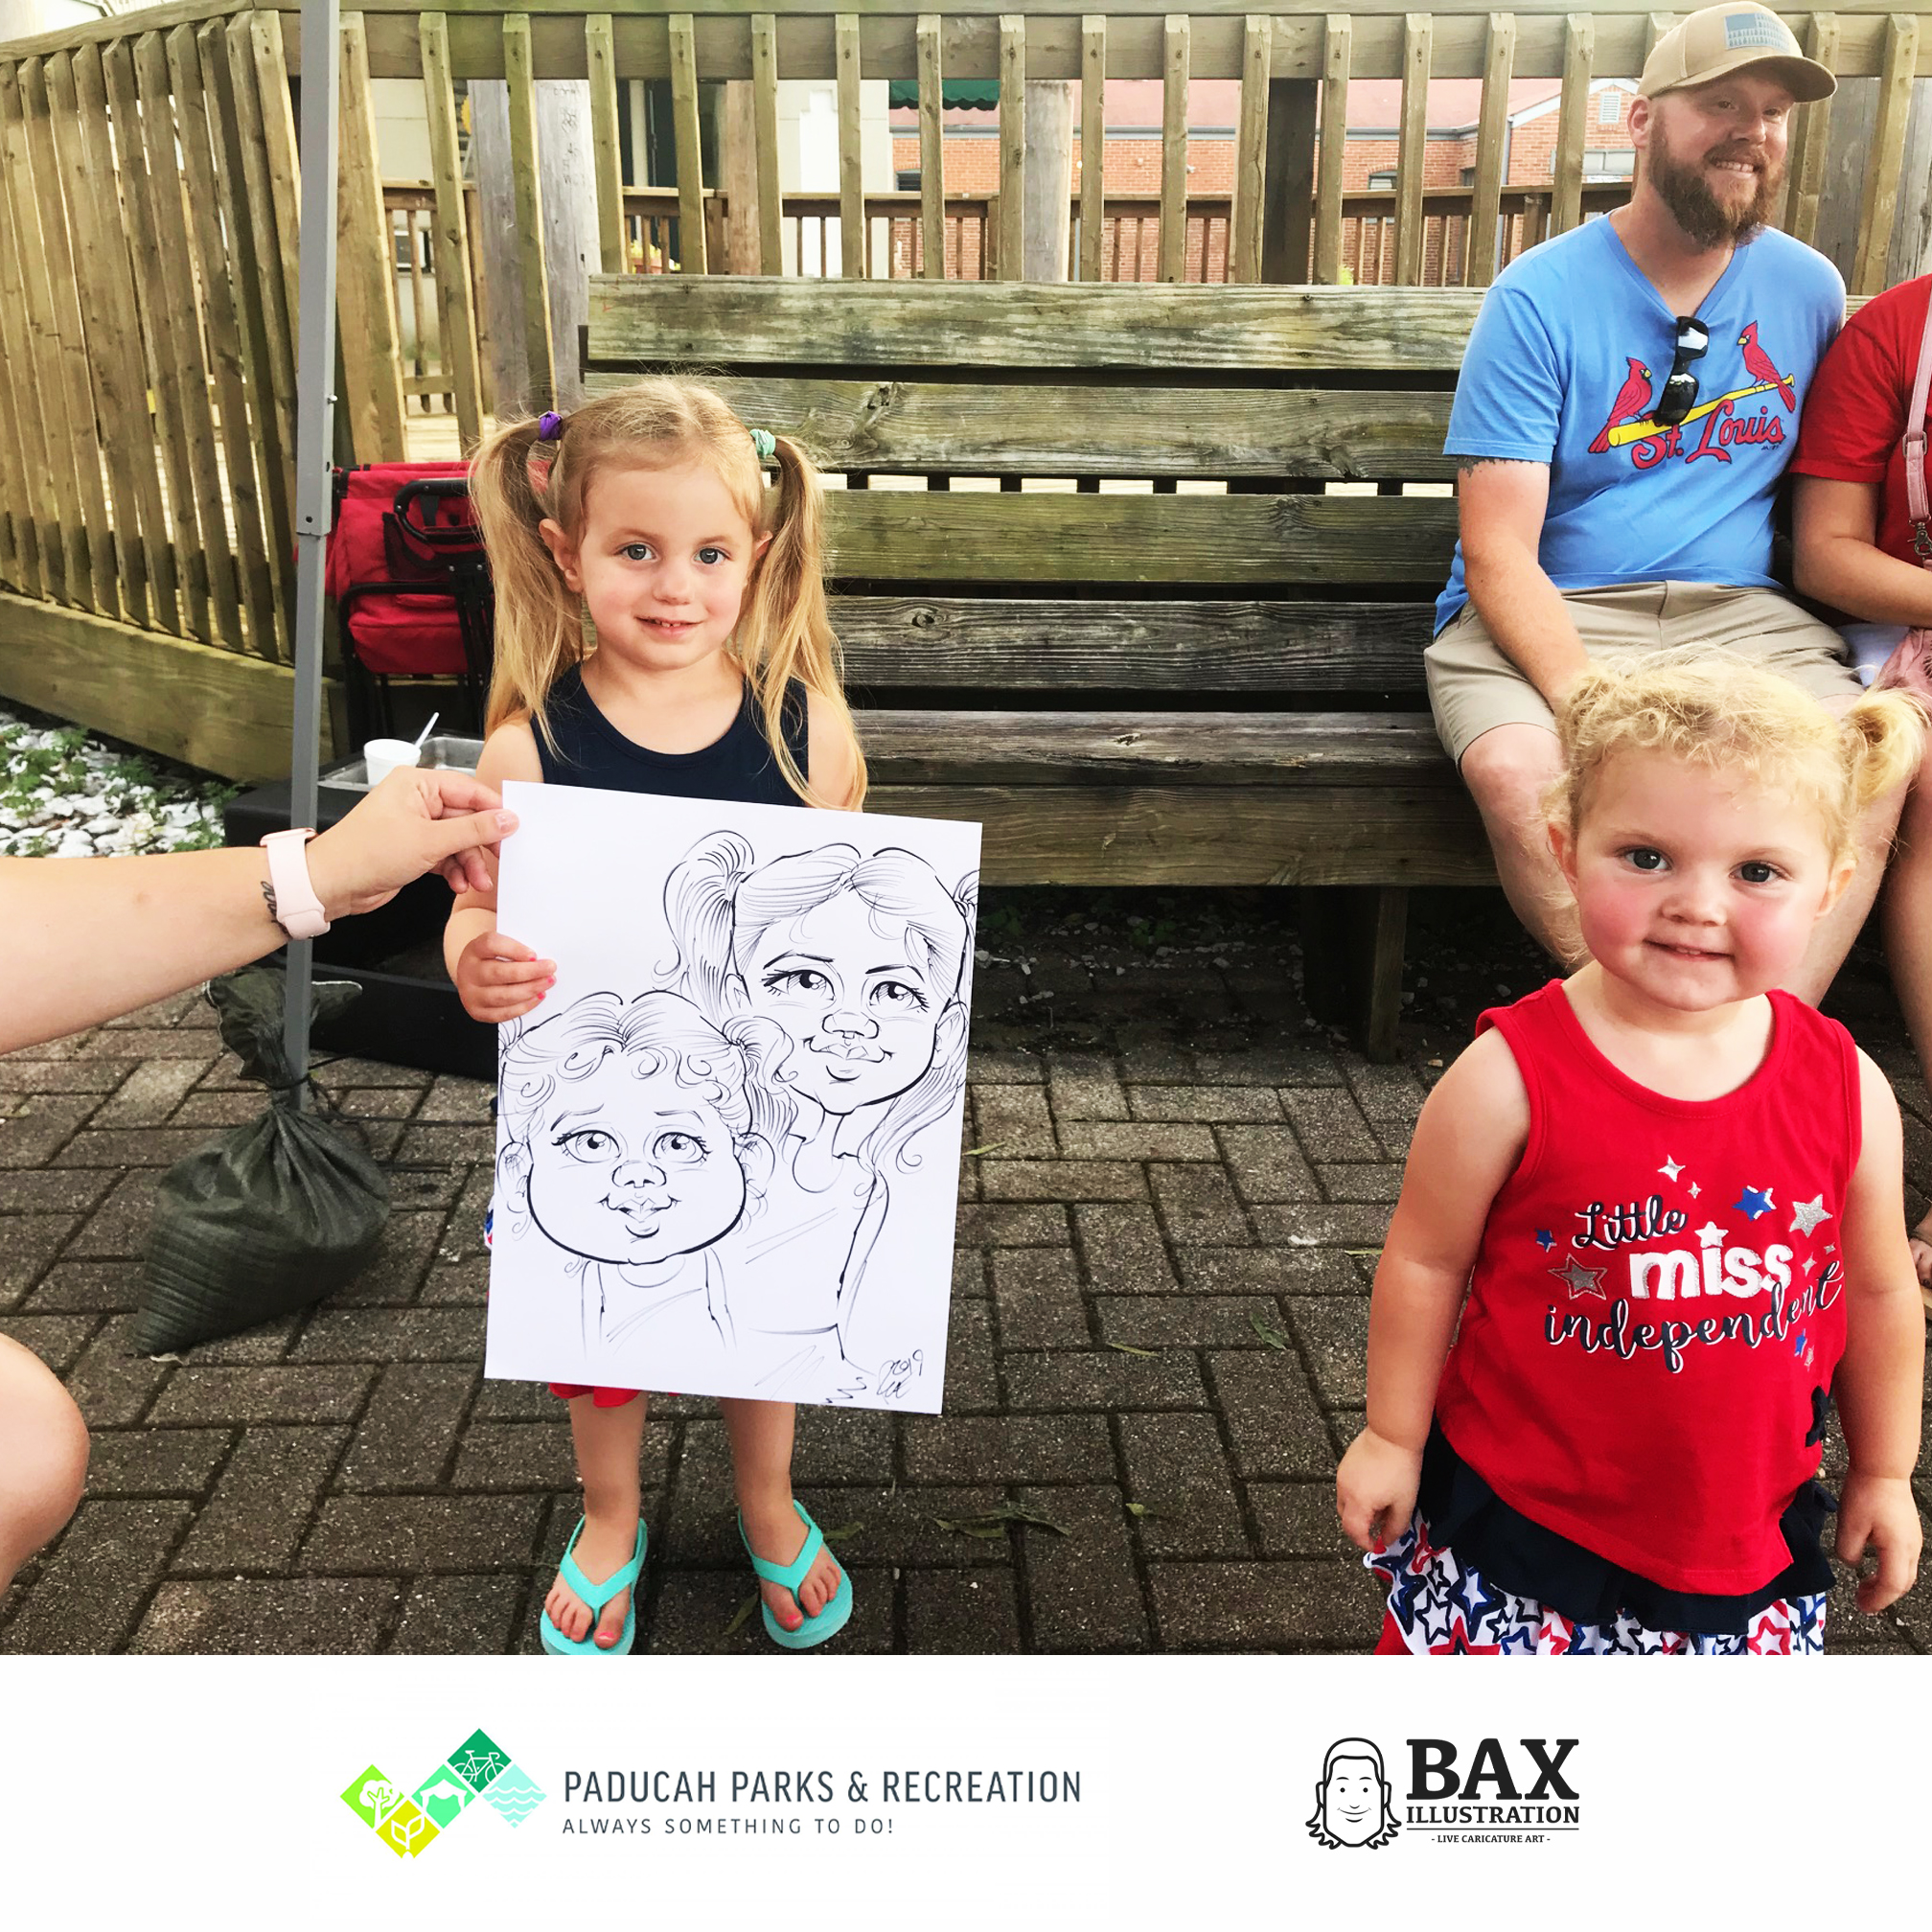 Kids holding caricature by Bax Illustration in Paducah Kentucky at the 2019 Independence Day Celebration